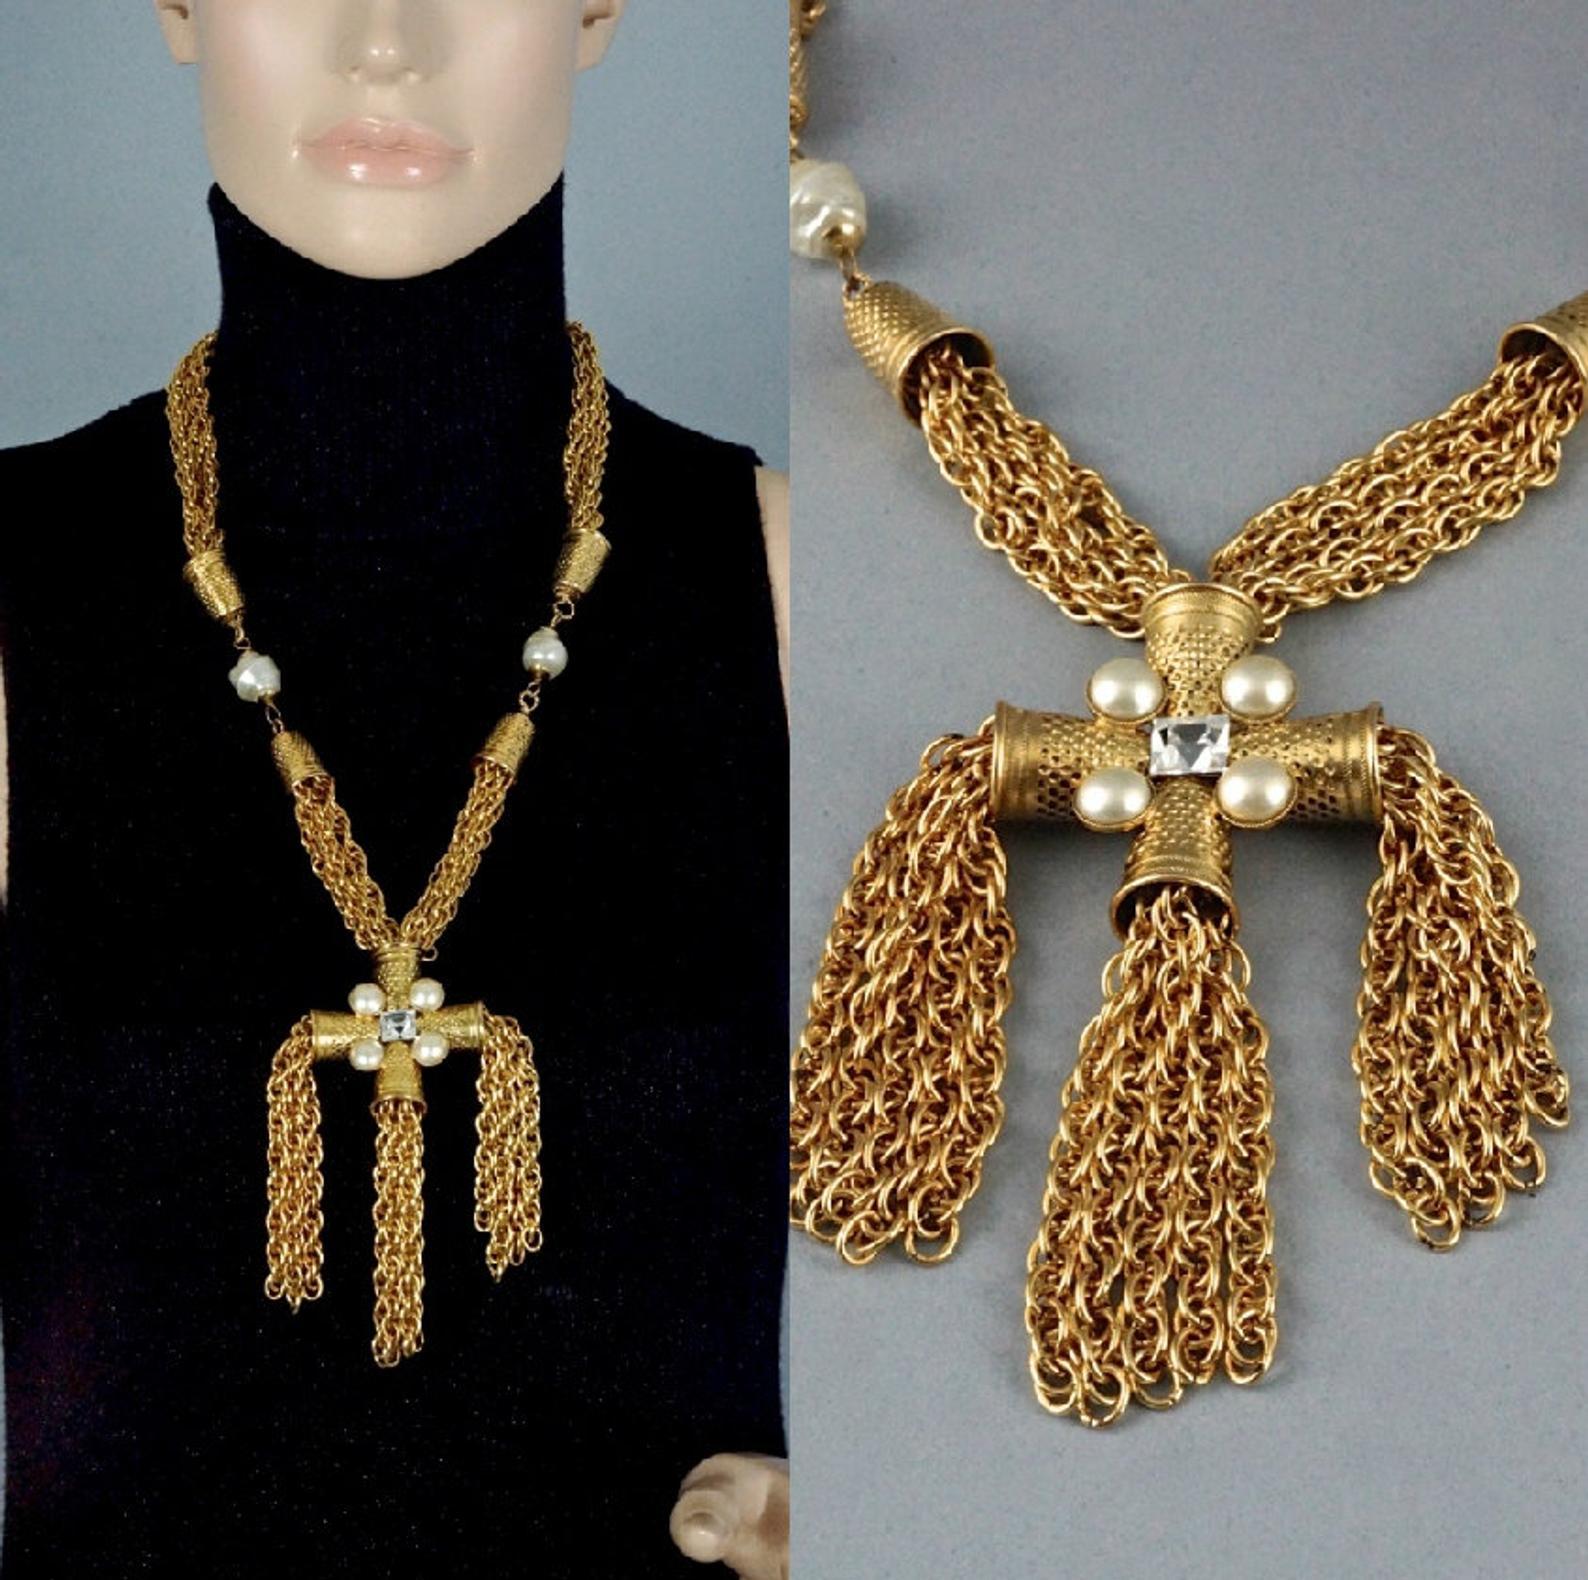 Vintage MOSCHINO Thimble Cross Rhinestone Pearl Cascading Tassel Fringe Chain Necklace

Measurements:
Height: 5.11 inches (13 cm)
Width: 5.11 inches (13 cm)
Length: 26.57 inches (67.5 cm)

Features:
- 100% Authentic MOSCHINO.
- Novelty thimble cross